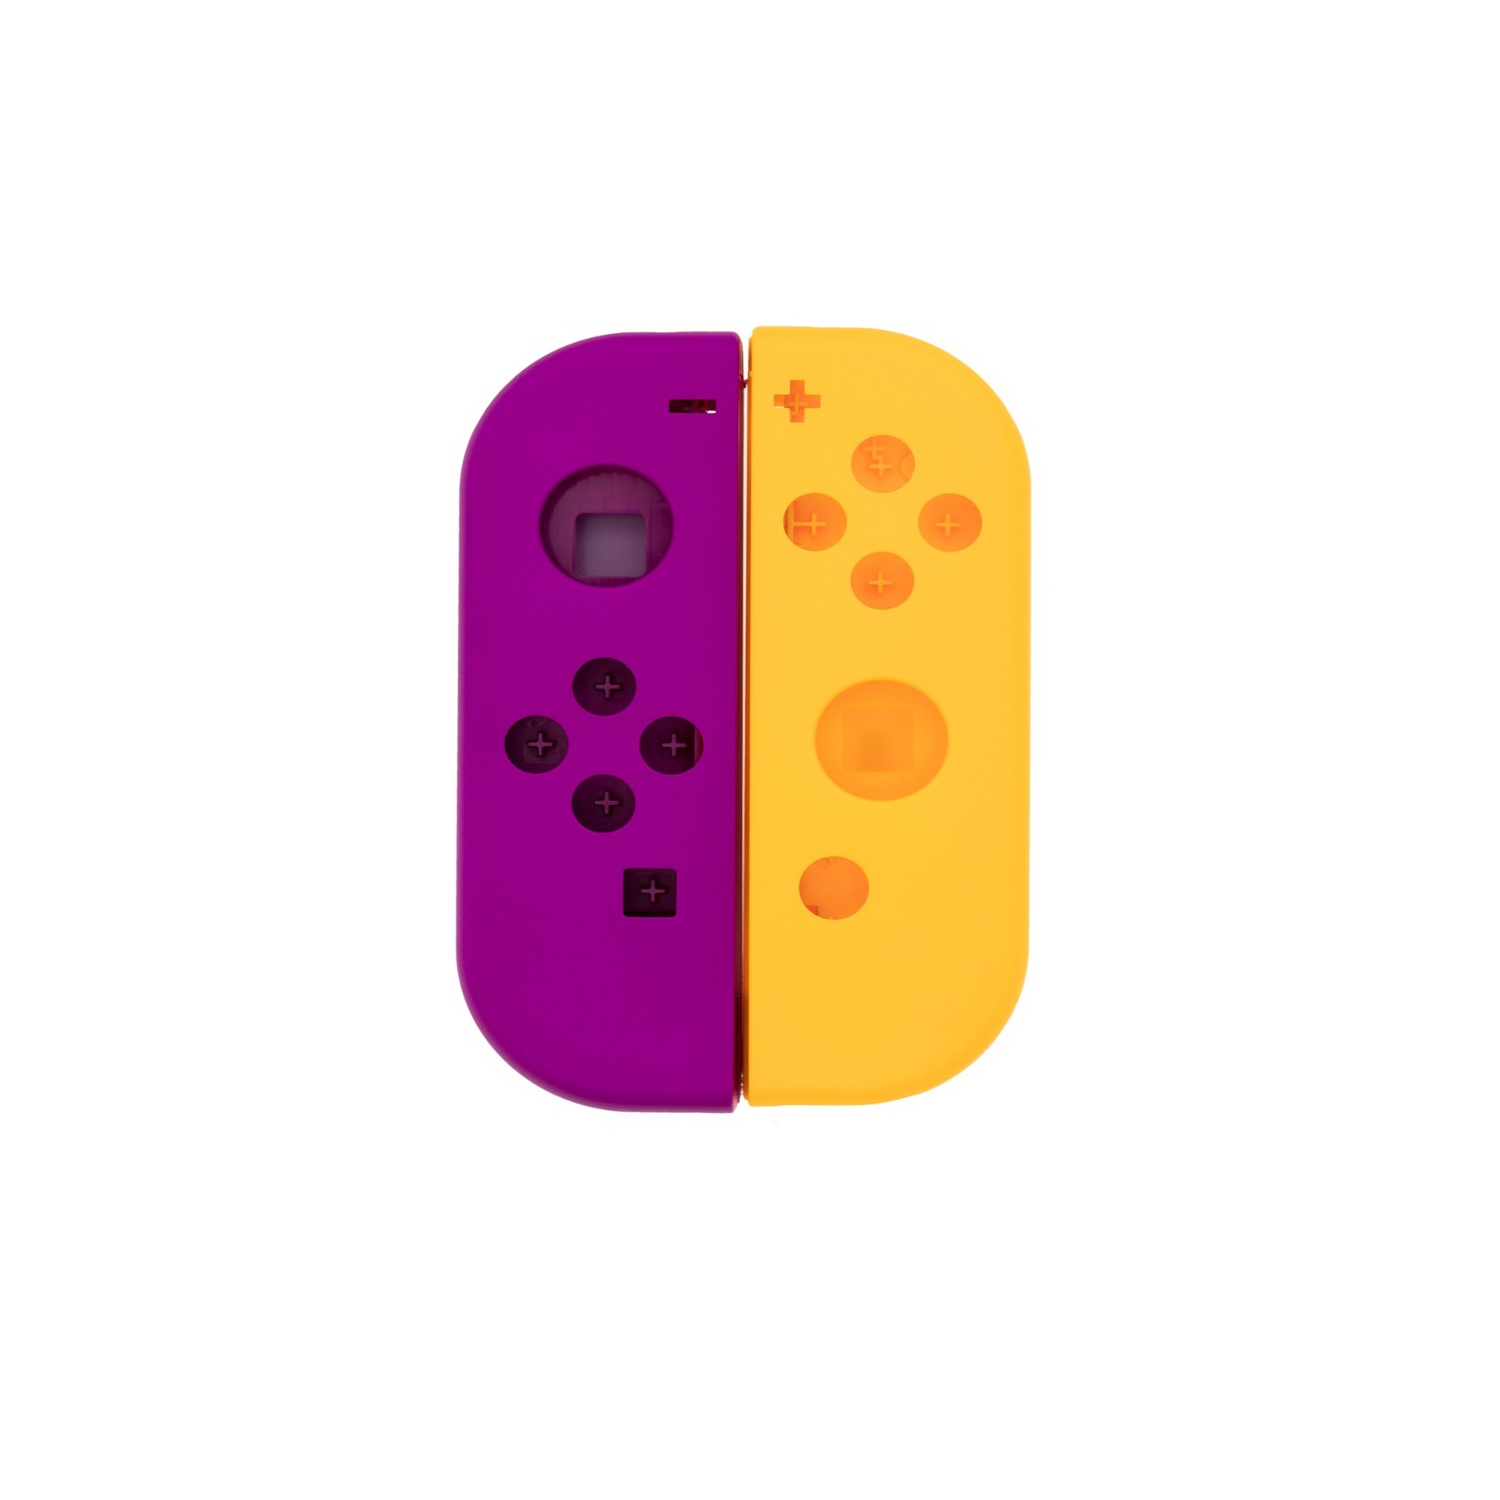 Replacement Housing Shell Case For Nintendo Switch Joy Con Controller - Yellow / Purple